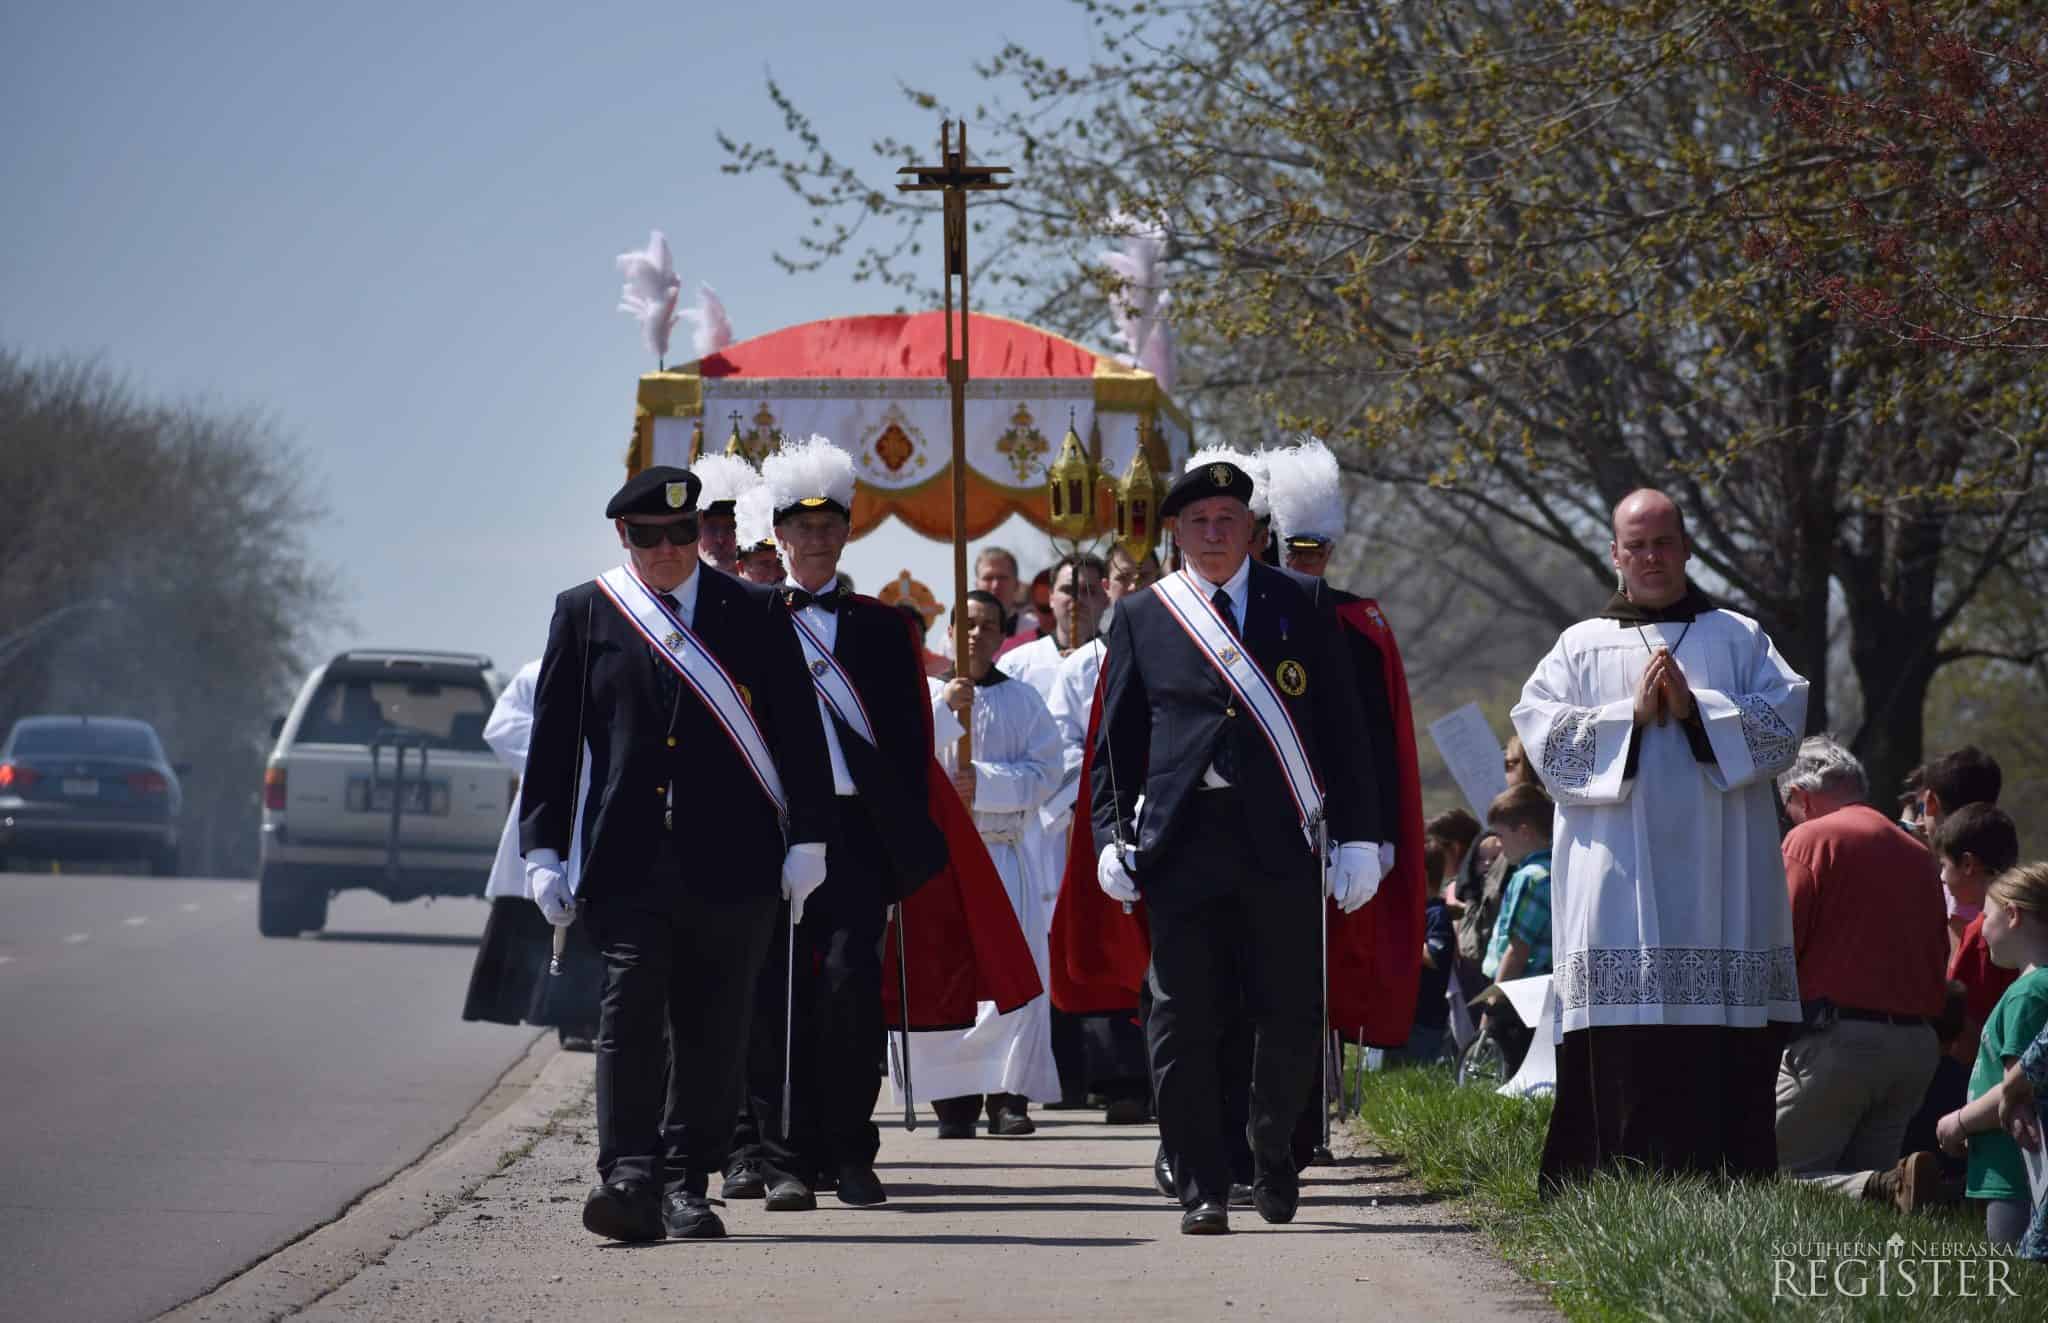 Br. Michael and others in procession